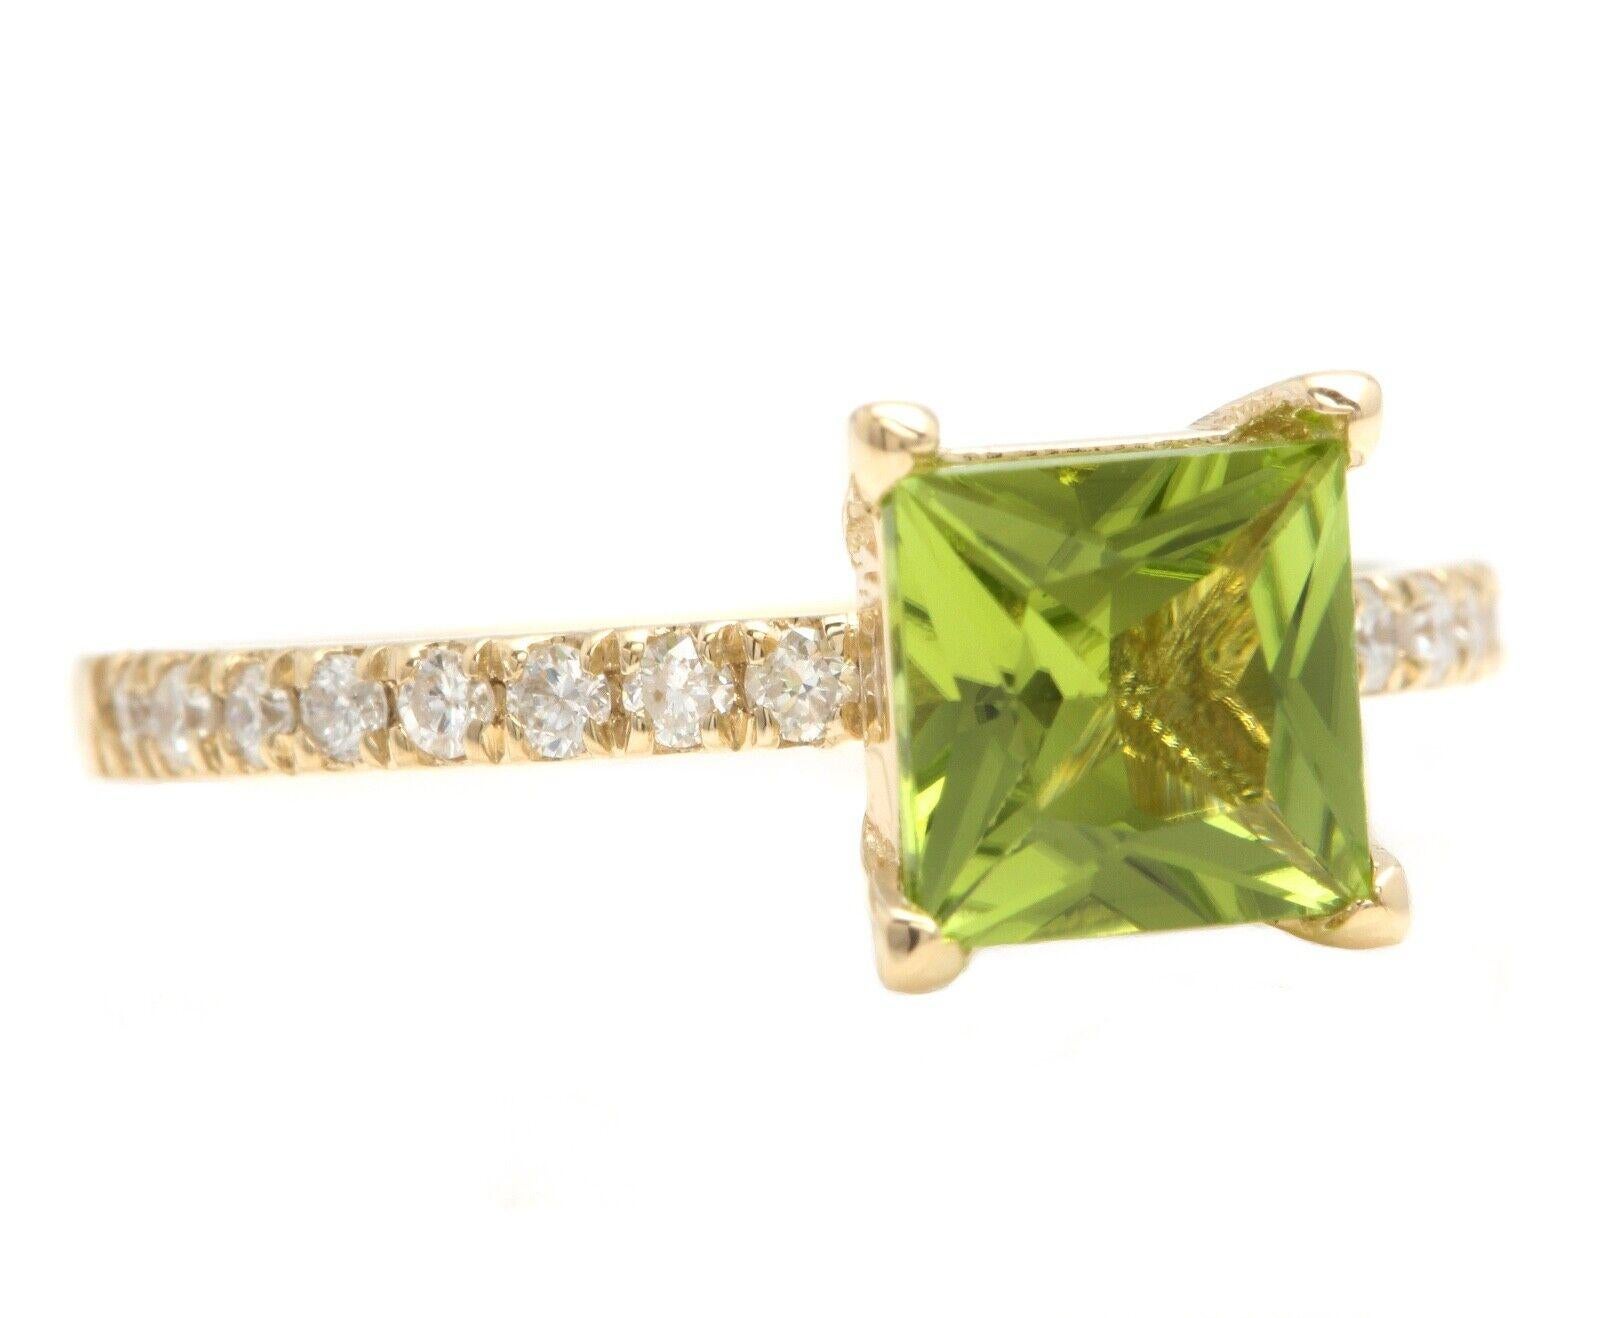 1.60 Carats Natural Very Nice Looking Peridot and Diamond 14K Solid Yellow Gold Ring

Suggested Replacement Value:  $2,500.00

Total Natural Princess Cut Peridot Weight is: Approx. 1.40 Carats 

Peridot Measures: Approx. 6.40 x 6.40mm

Natural Round